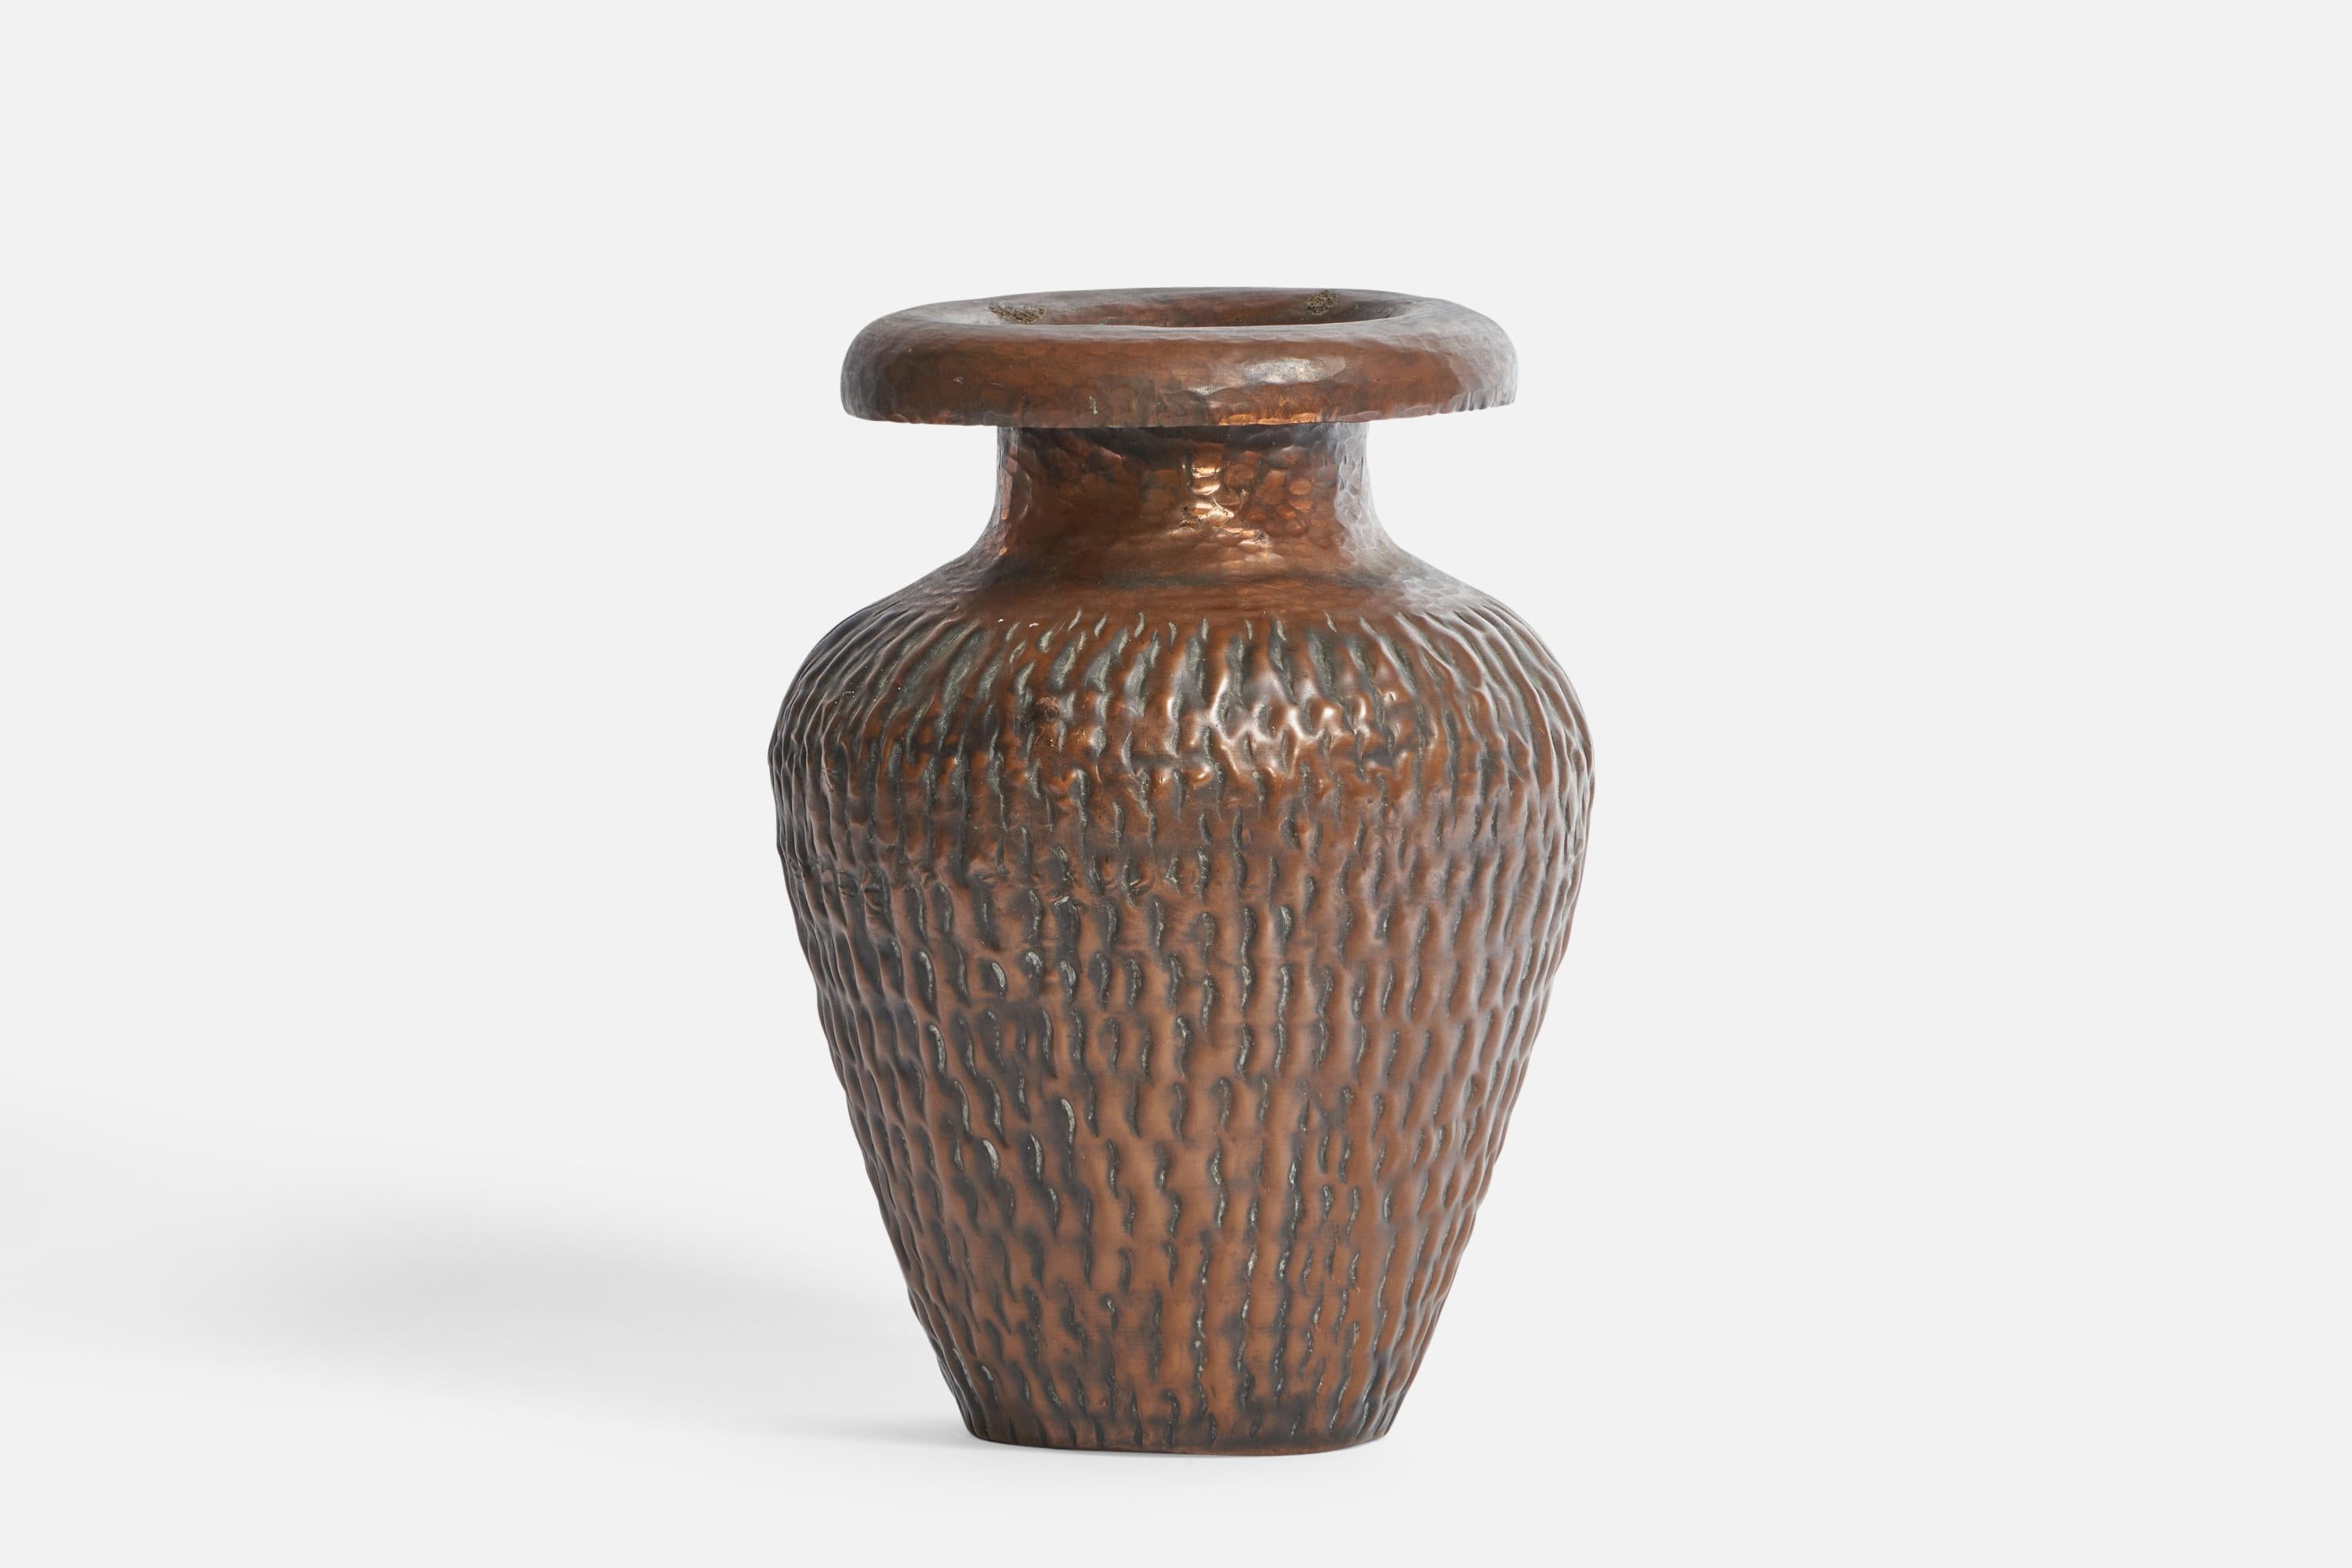 A hammered copper vase designed and produced in Italy, 1930s.